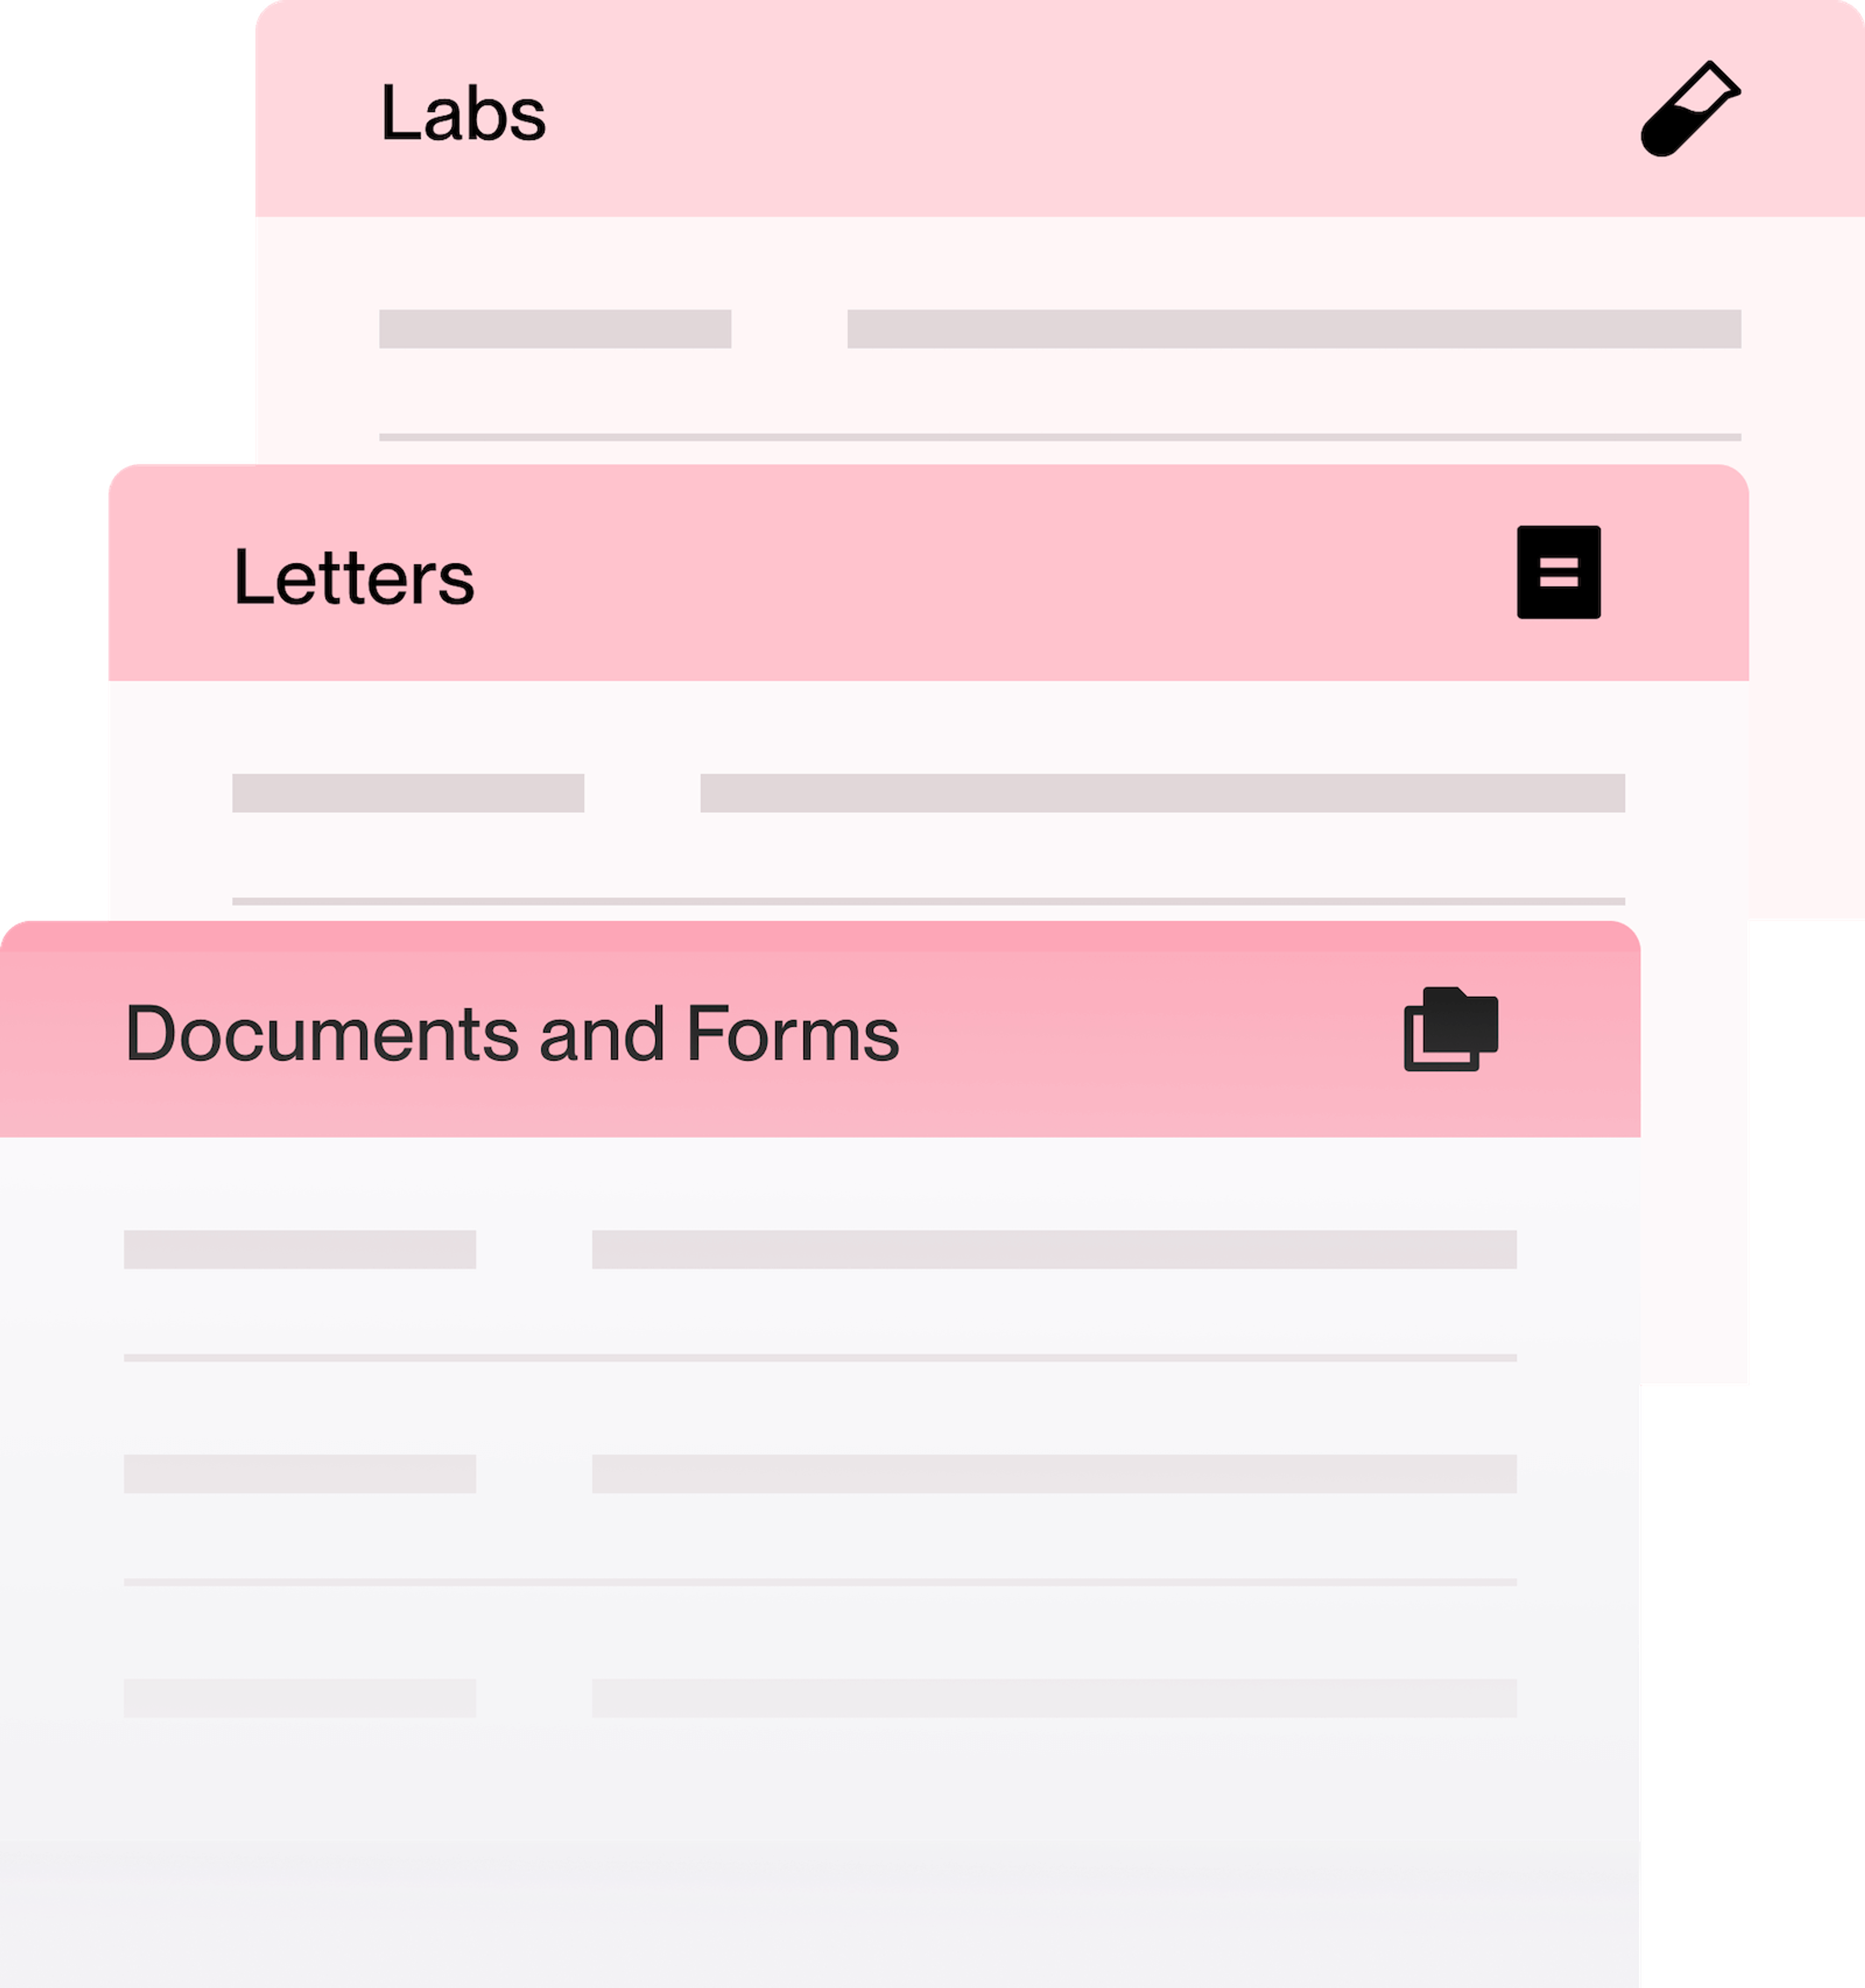 Three windows labeled 'Labs, Letters, and Documents and Forms'